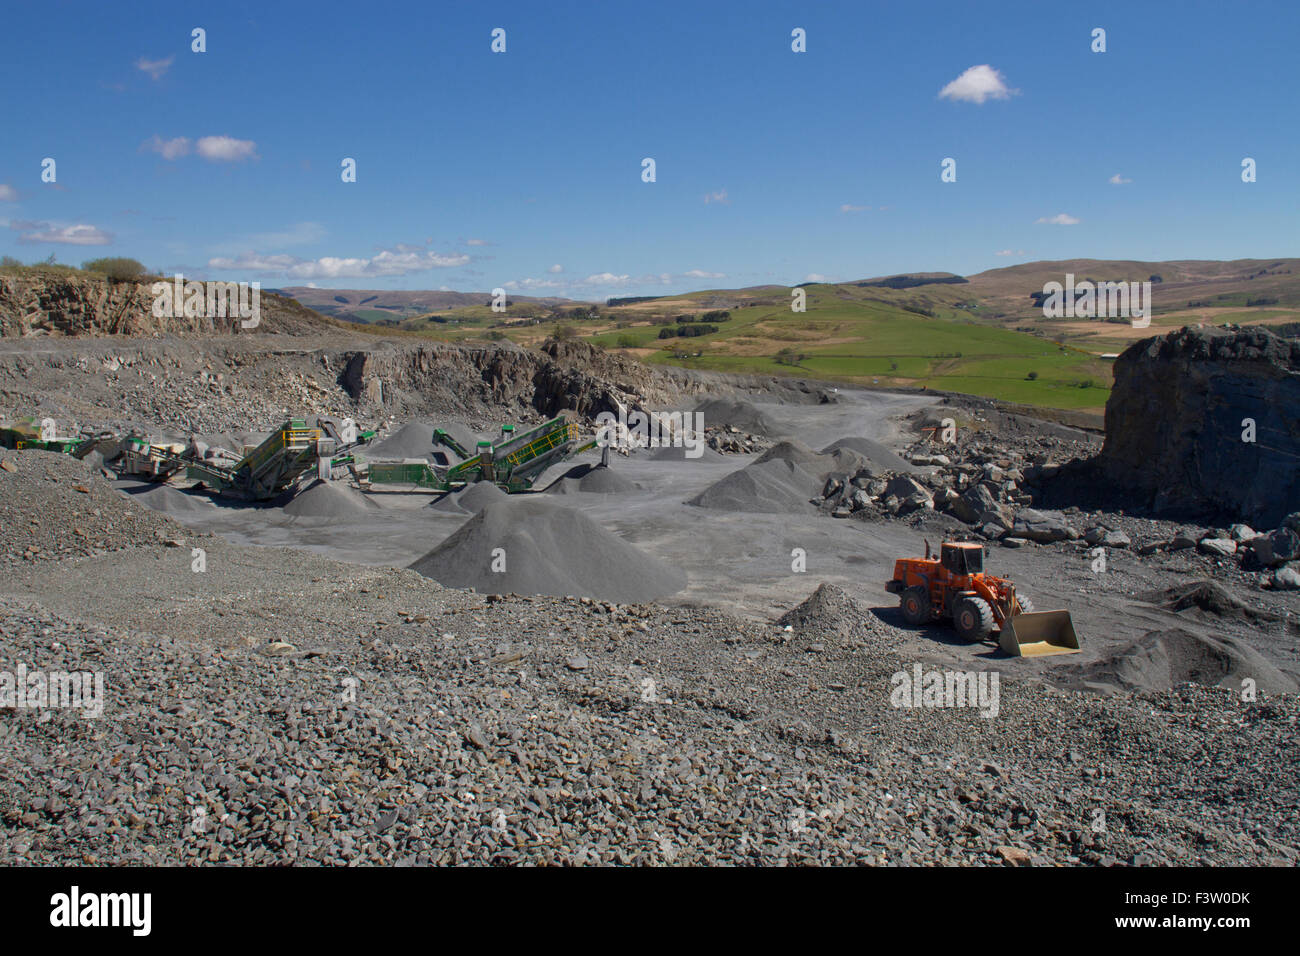 Rock crushing machinery in a working roadstone quarry. Ystrad Meurig quarry. Ceredigion, Wales. April. Stock Photo